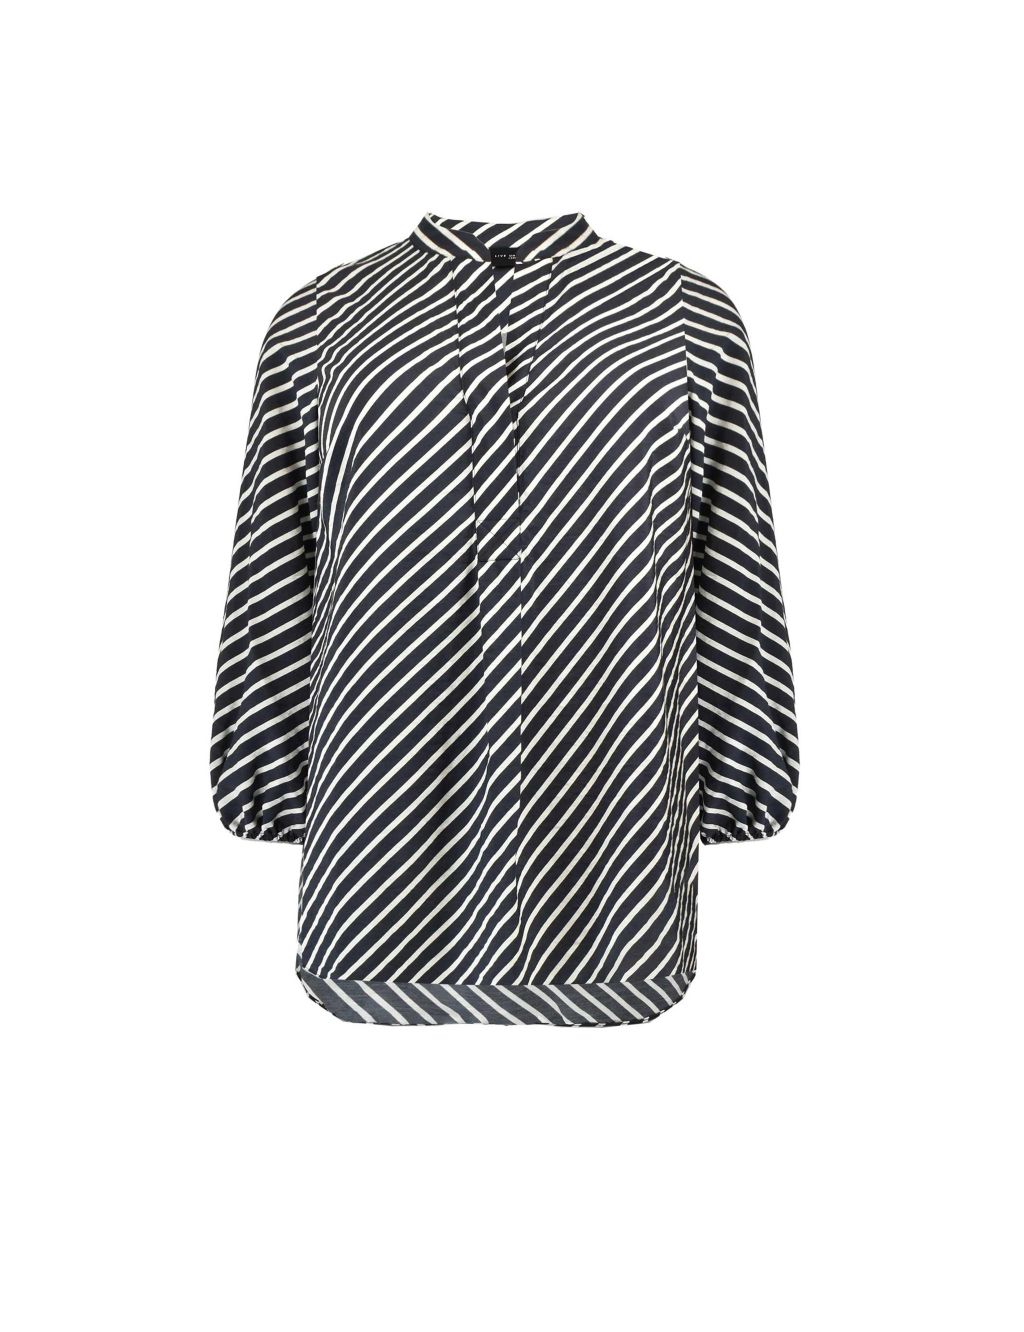 Striped Collared Relaxed Shirt image 2